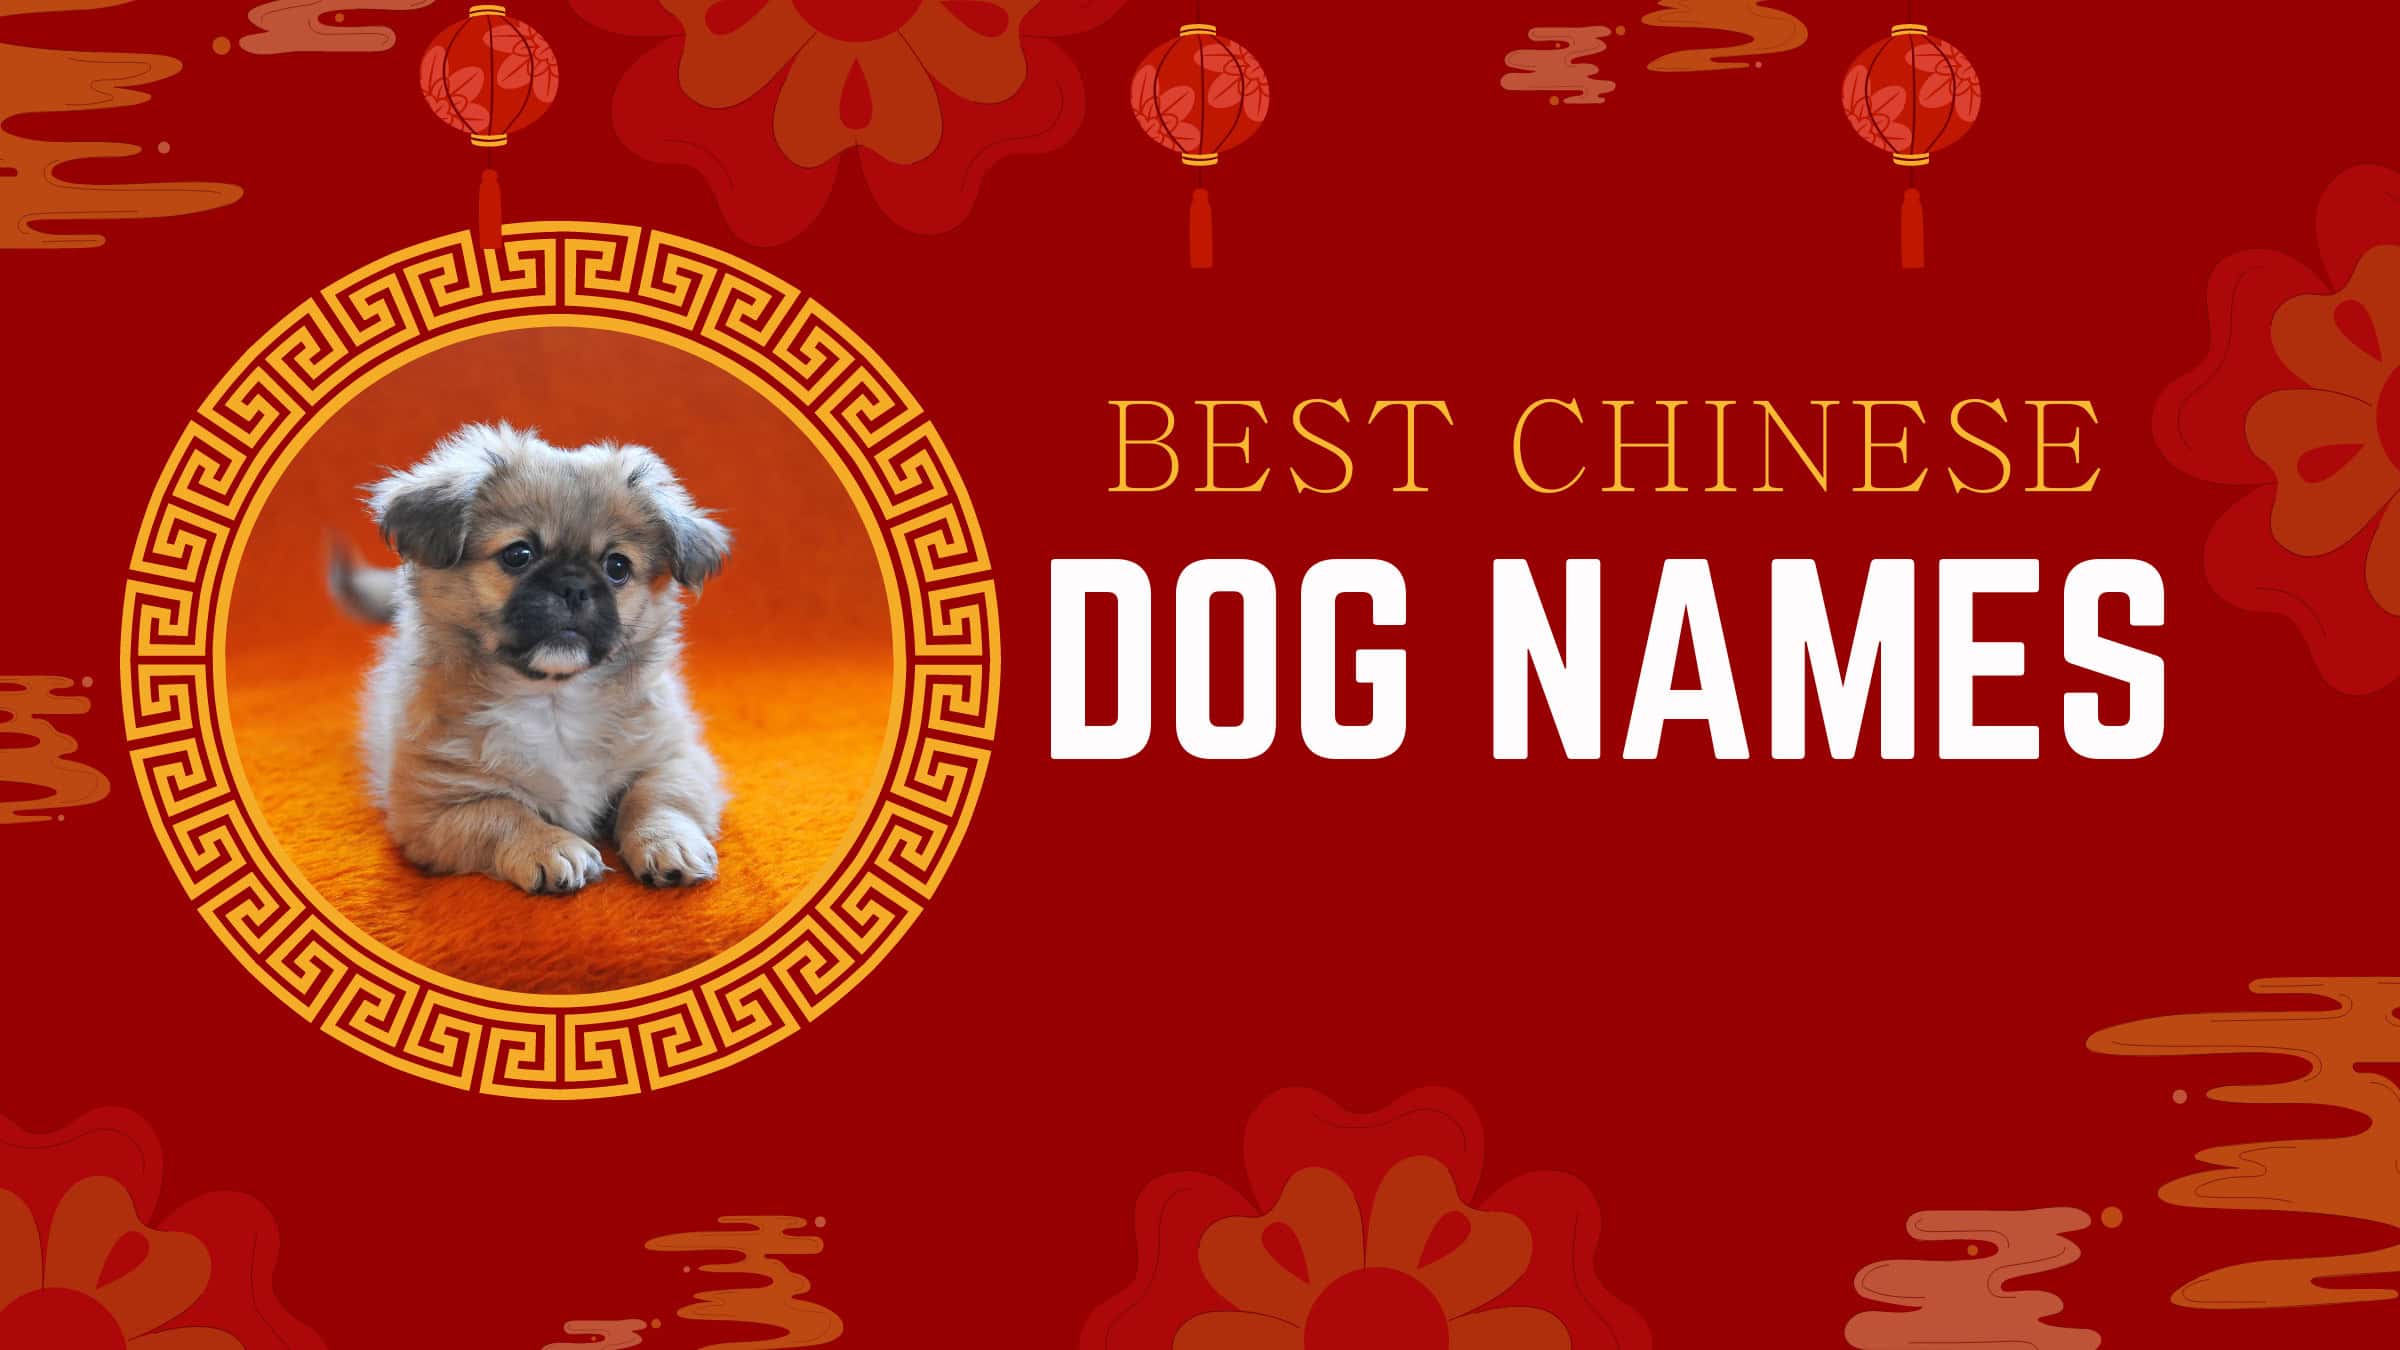 Best Chinese Dog Names